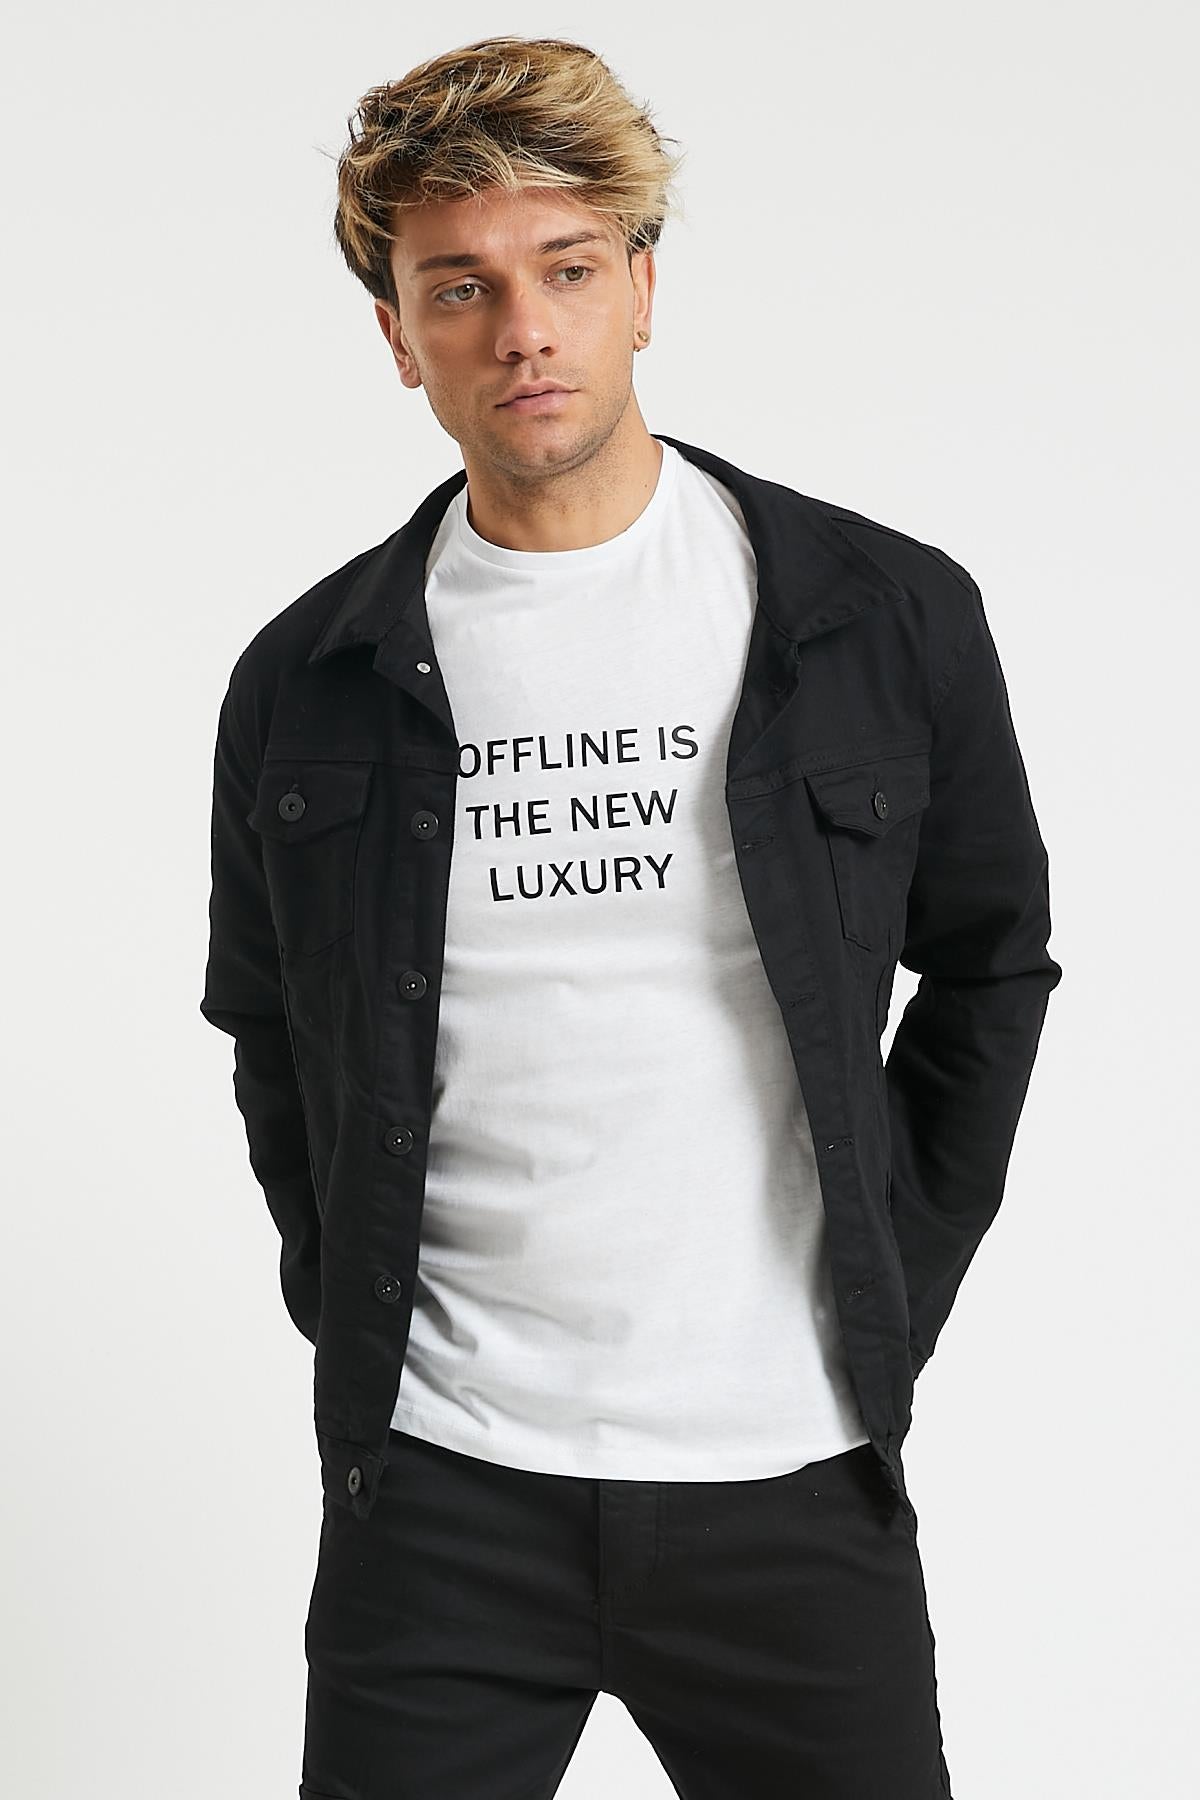 Off LINE IS THE NEW Luxury Graphic Printed, Cotton Crew Neck Men's T -shirt